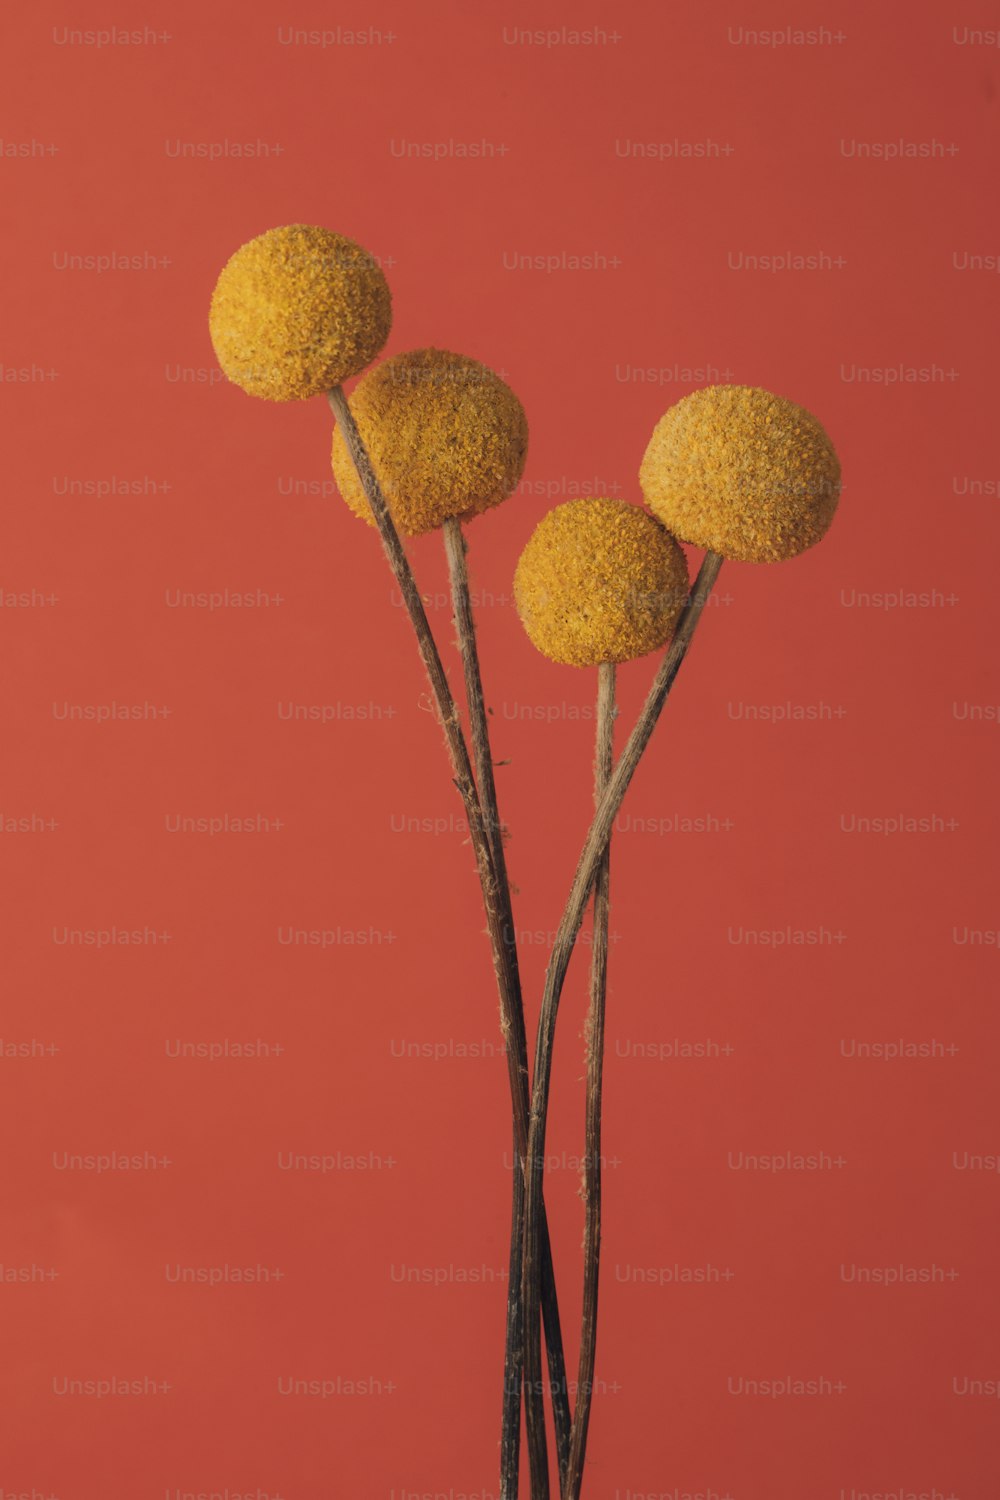 three yellow flowers are in a vase on a red background